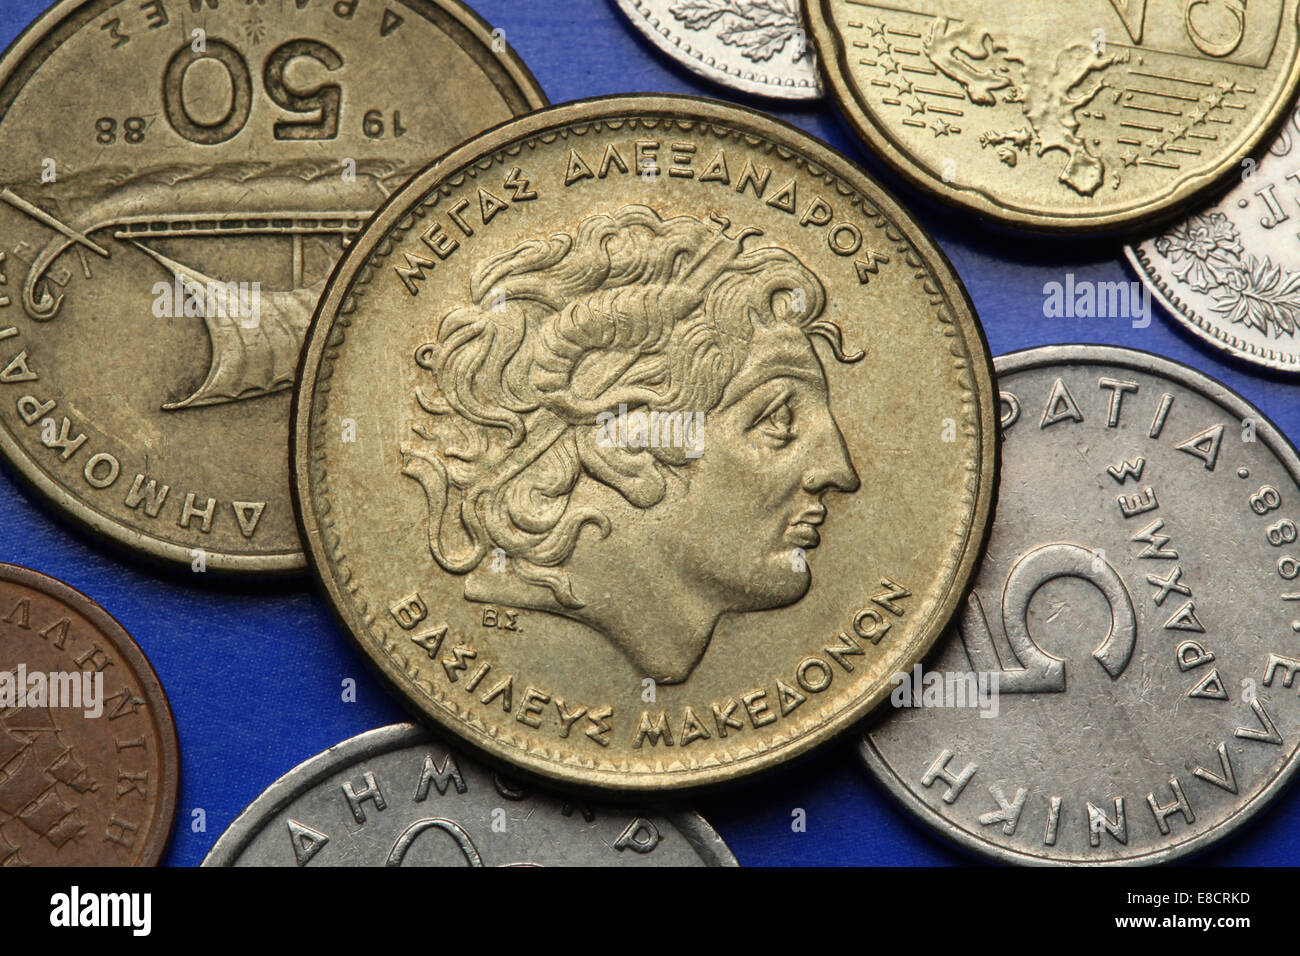 Coins of Greece. Alexander the Great depicted in the old Greek 100 drachma coin. Stock Photo